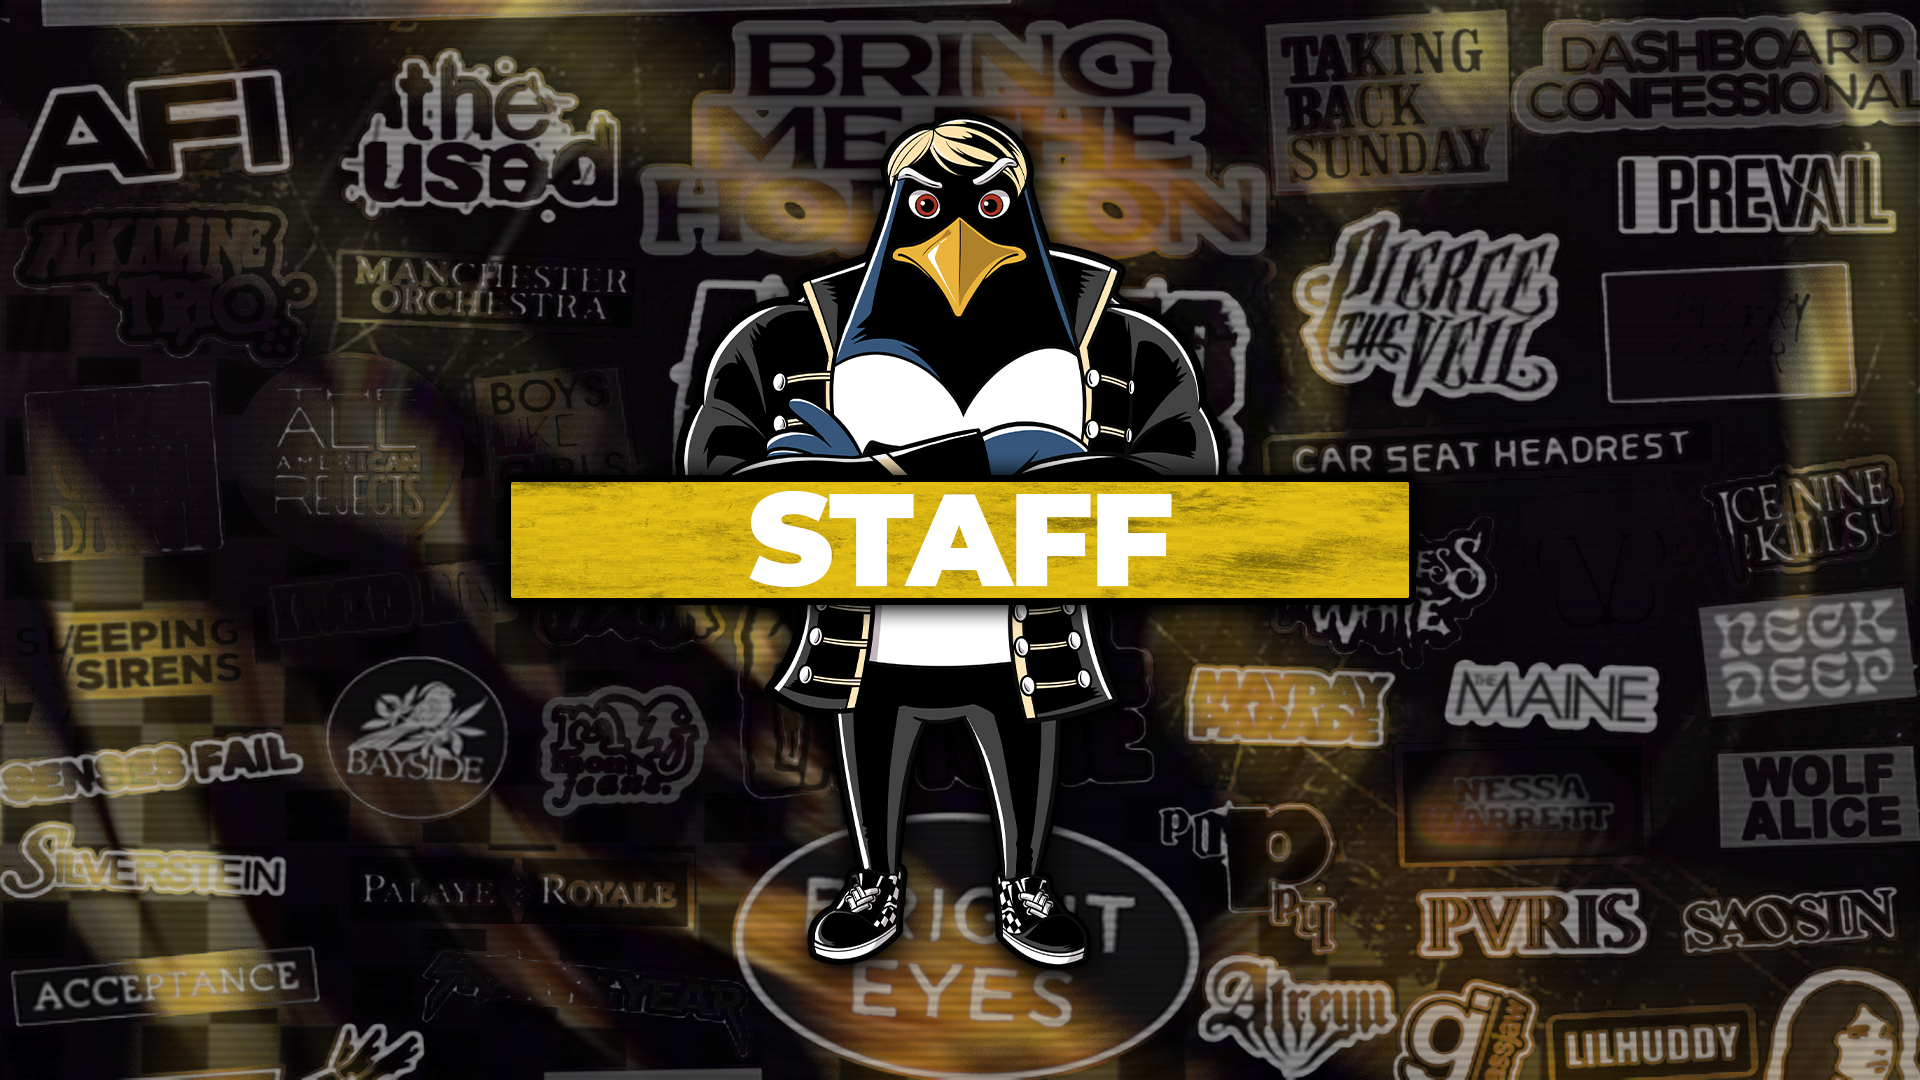 A stylized 'STAFF' banner for Emo Night, featuring a cool cartoon penguin in punk attire against a moody, dark backdrop with neon outlines of famous emo and punk band names like AFI, The Used, and Bring Me The Horizon. The 'STAFF' text is prominently displayed on a yellow banner, indicating the dedicated team behind the music event.